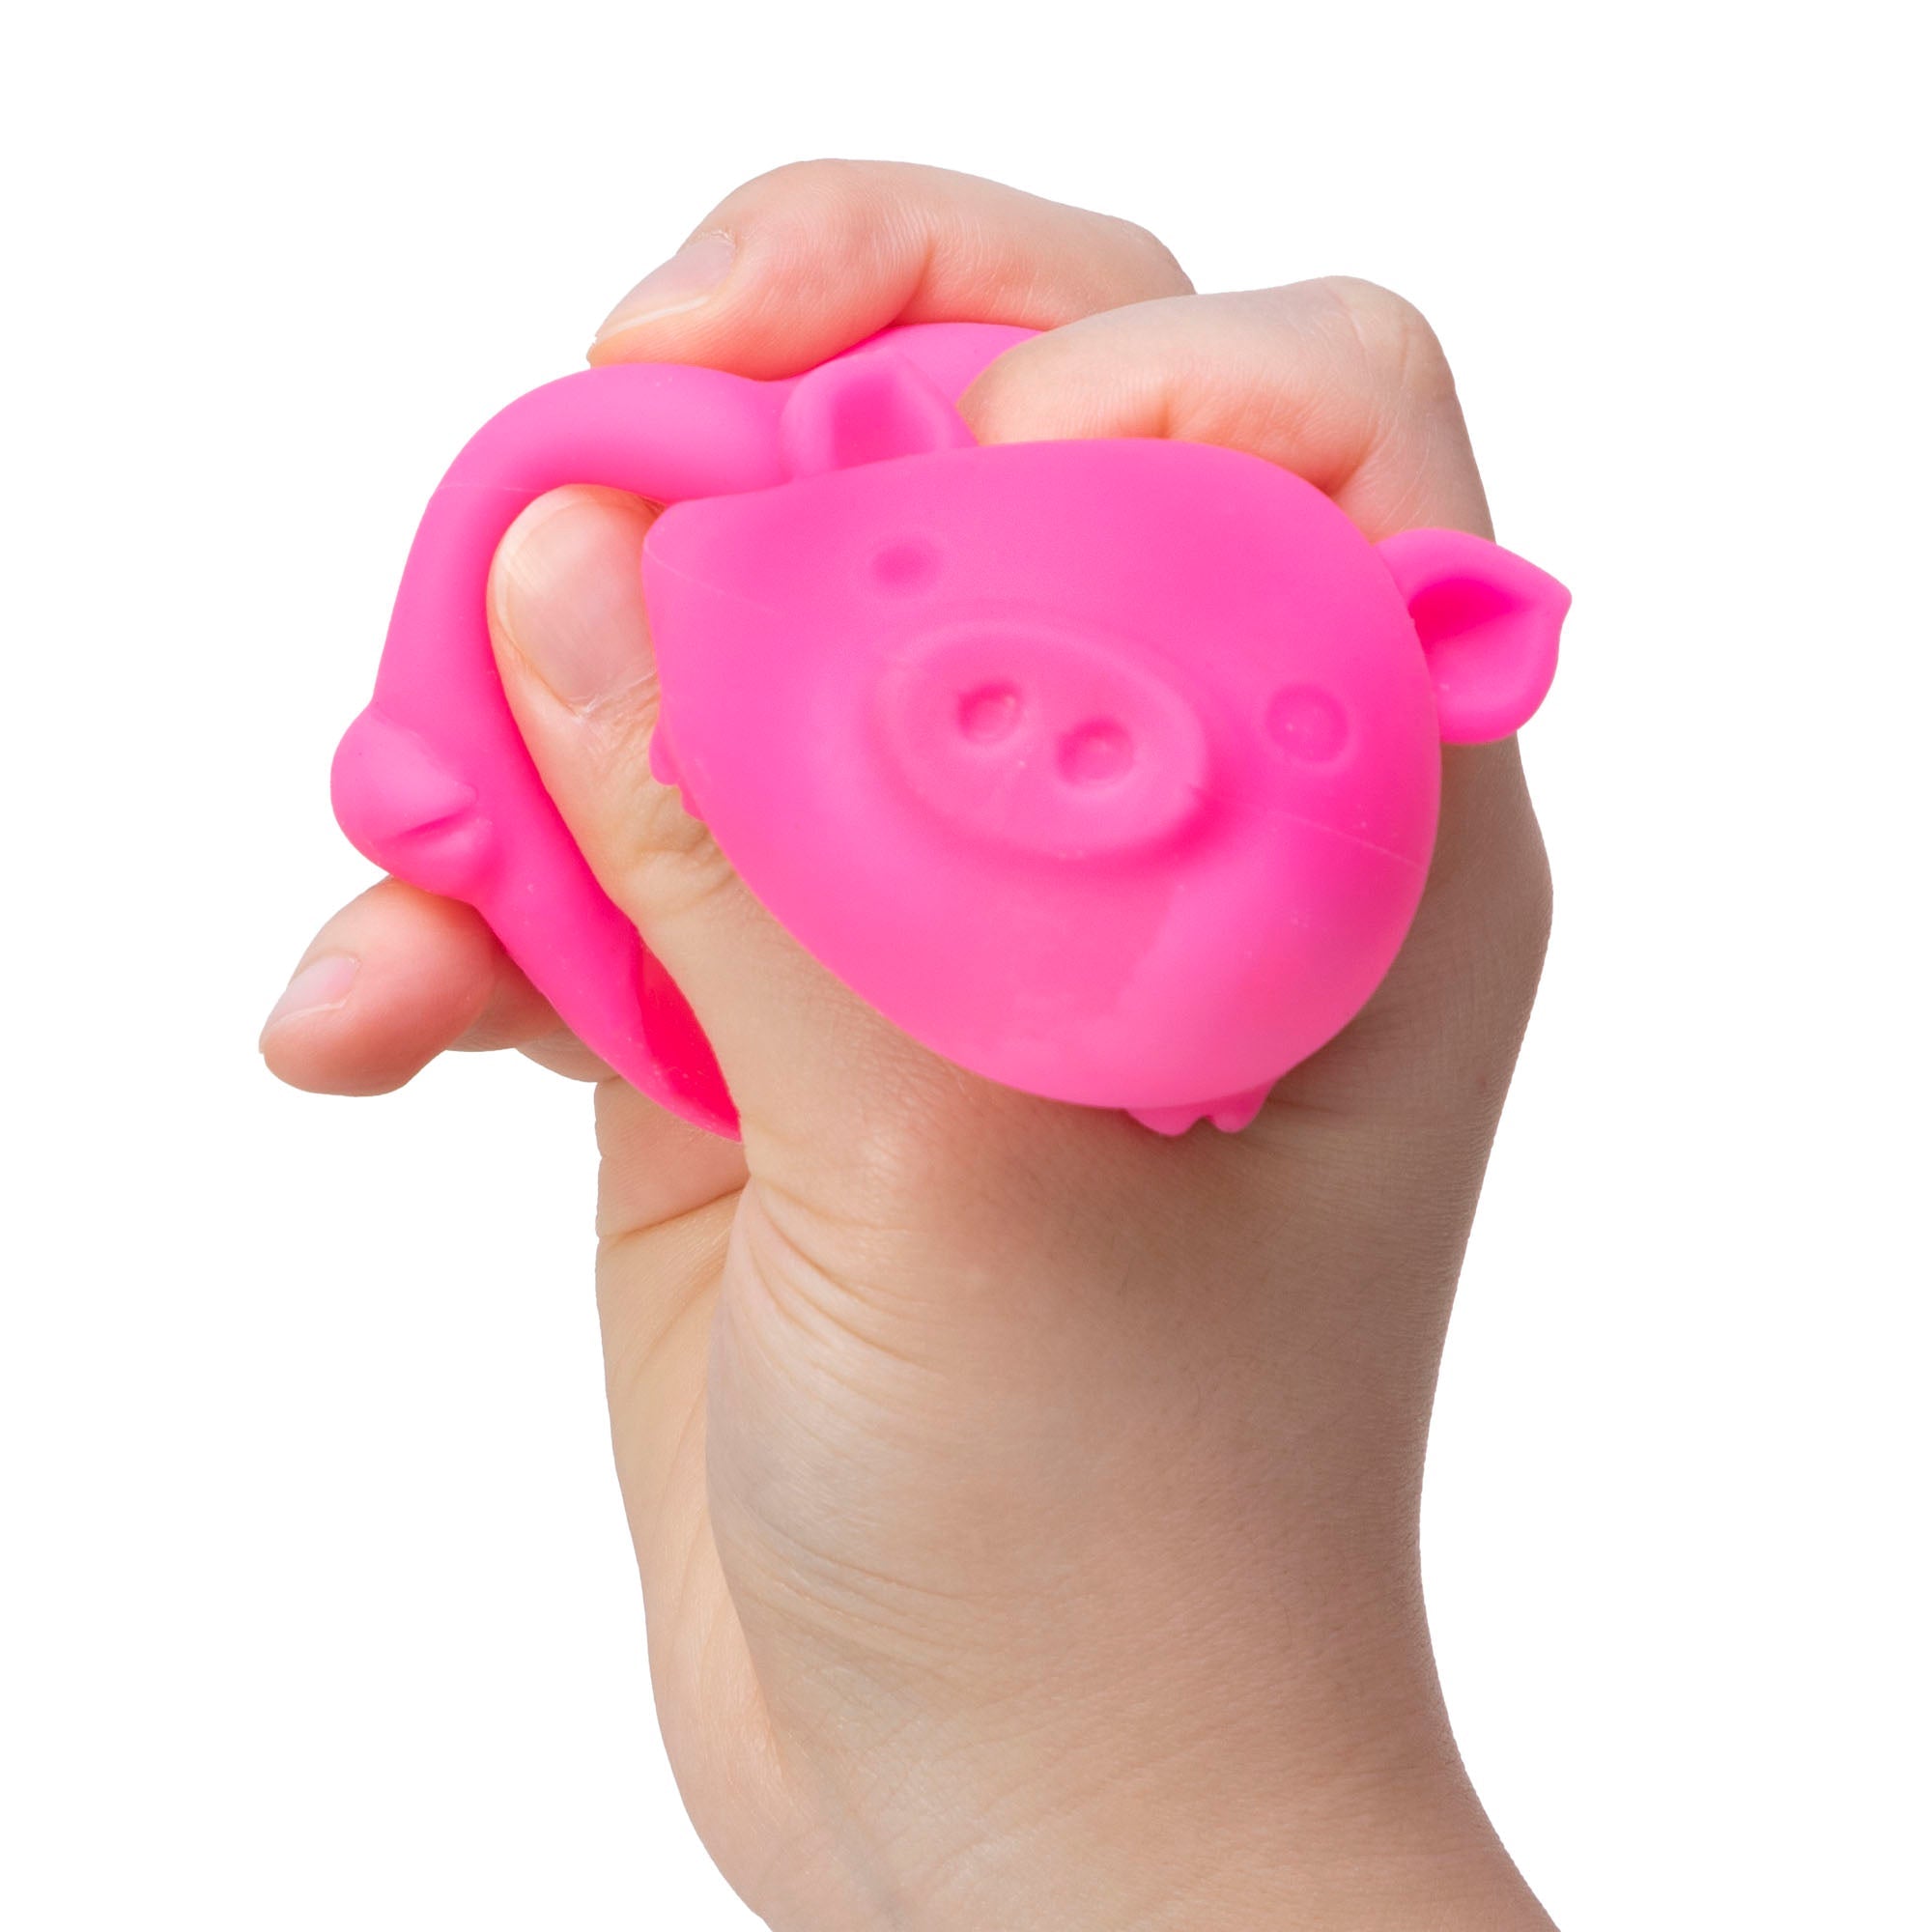 NeeDoh Dig It Pig, For an adorably ‘ham-some’ fidget toy, say hello to the NeeDoh Dig It Pig. Squeeze away any stress with these cute squashy pigs. Youngsters will love their new piggy pal. These unique Nee Doh stress balls have a tummy filled with the famous non-toxic doh and are available in four different colours (chosen at random). Features pointy ears, eyes and a cute snout. NeeDoh Dig It Pigs are a great fidget toy, particularly appropriate for those with ADD, ADHD, OCD, Autism, and anxiety. Gentle on